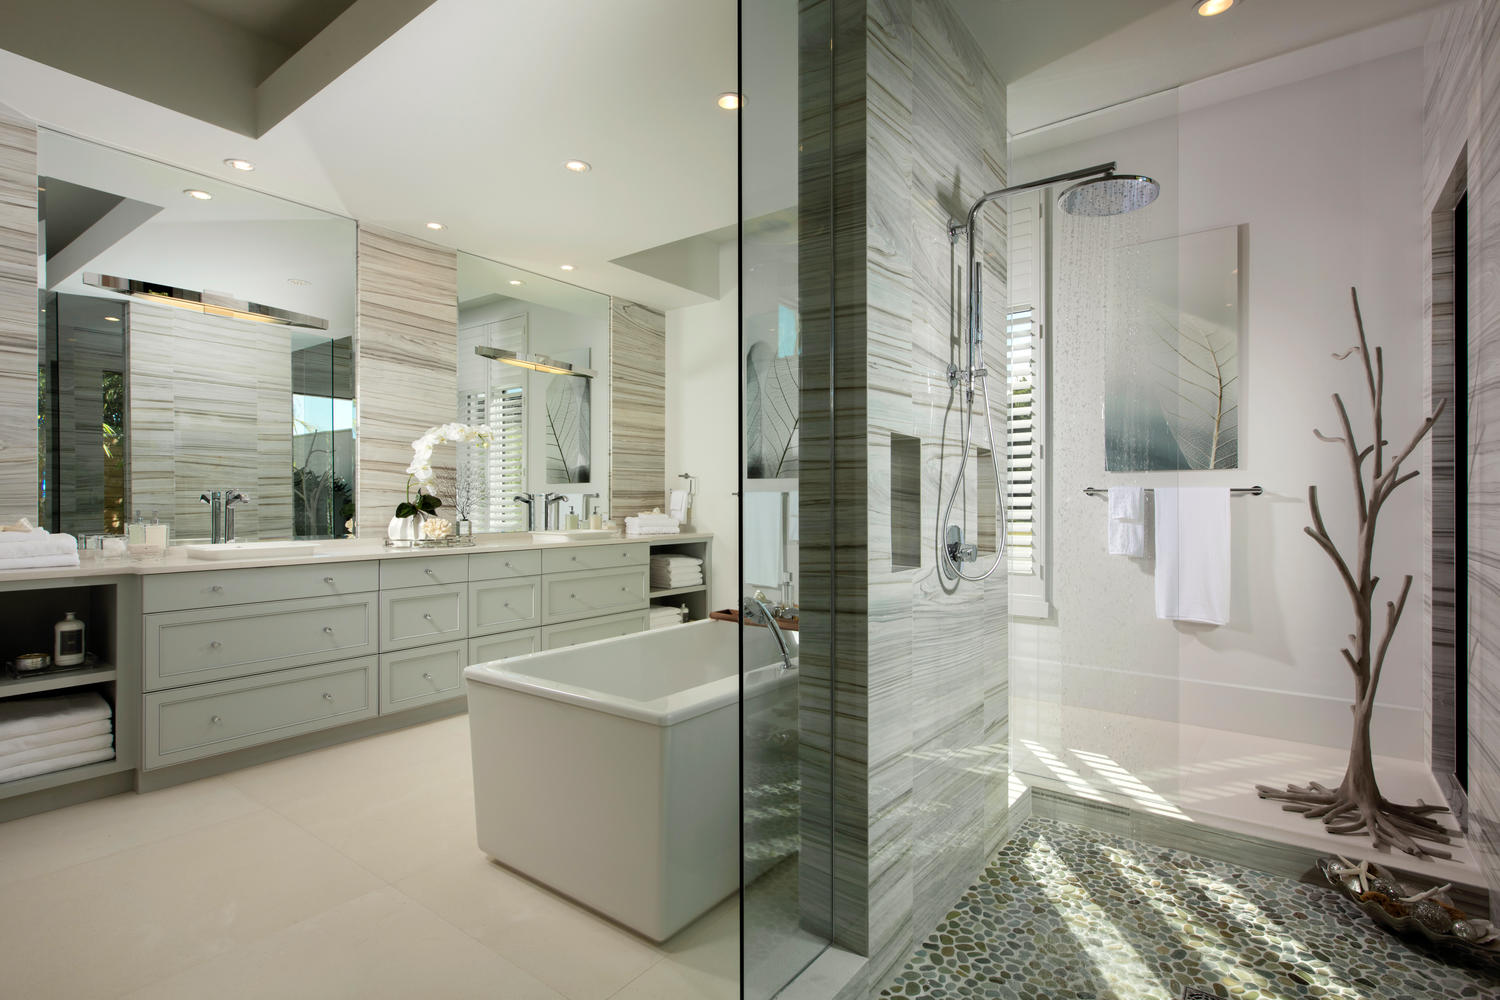 8 Features Your Luxury Master Bathroom Must Have